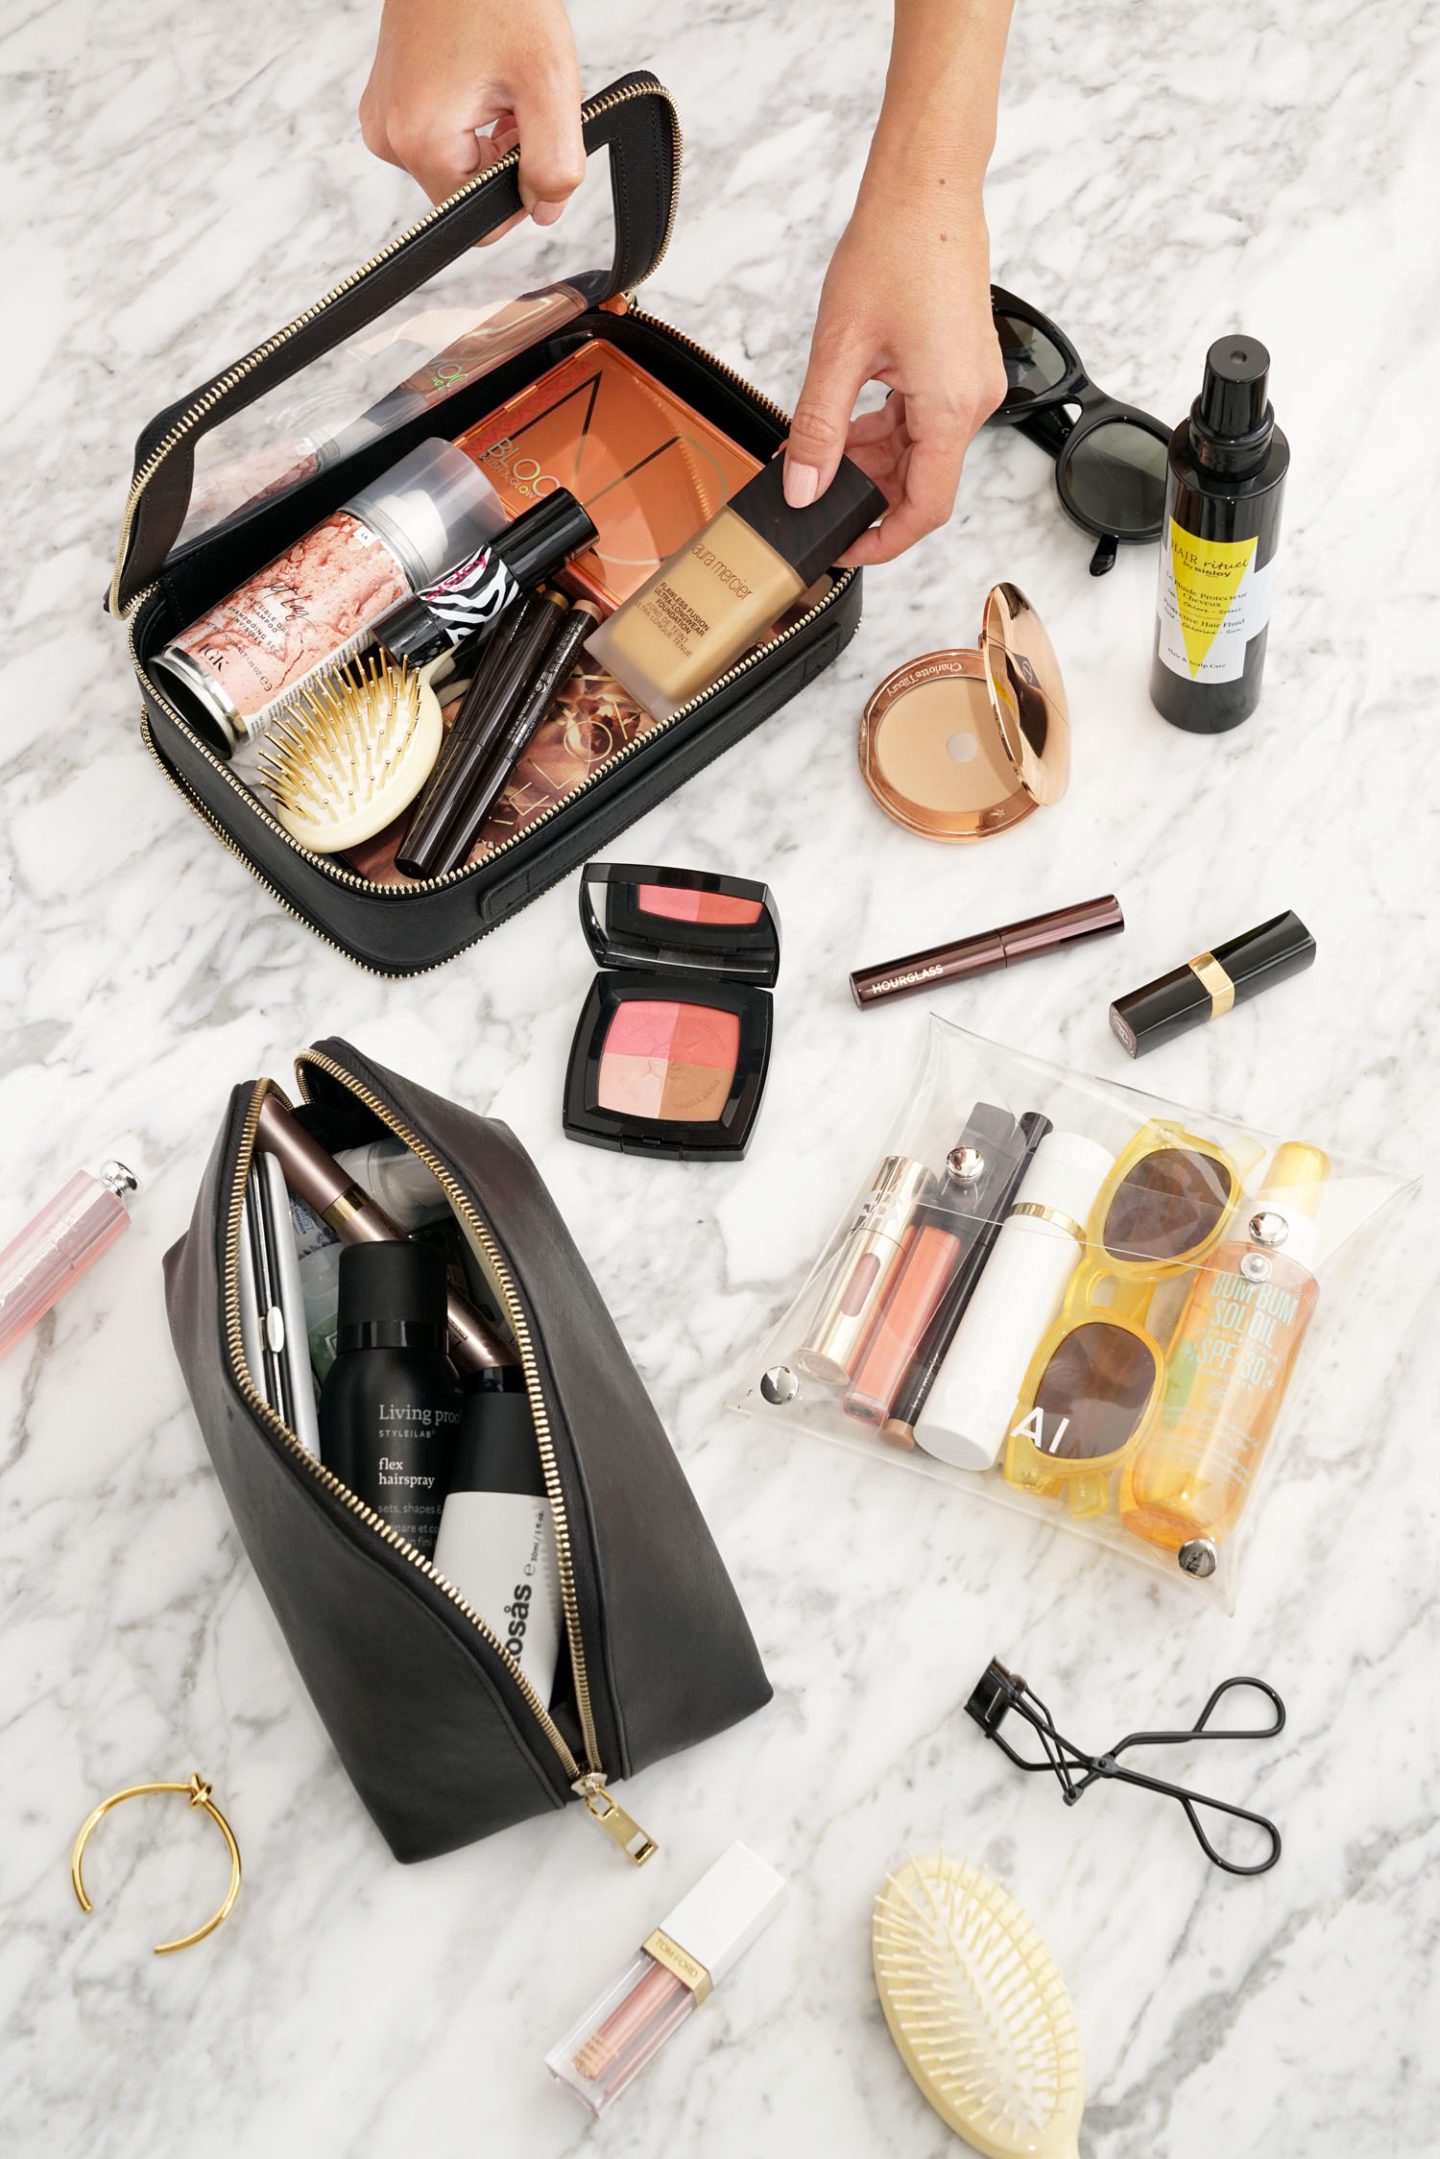 travel-makeup-pouches-i-never-leave-home-without-the-beauty-look-book